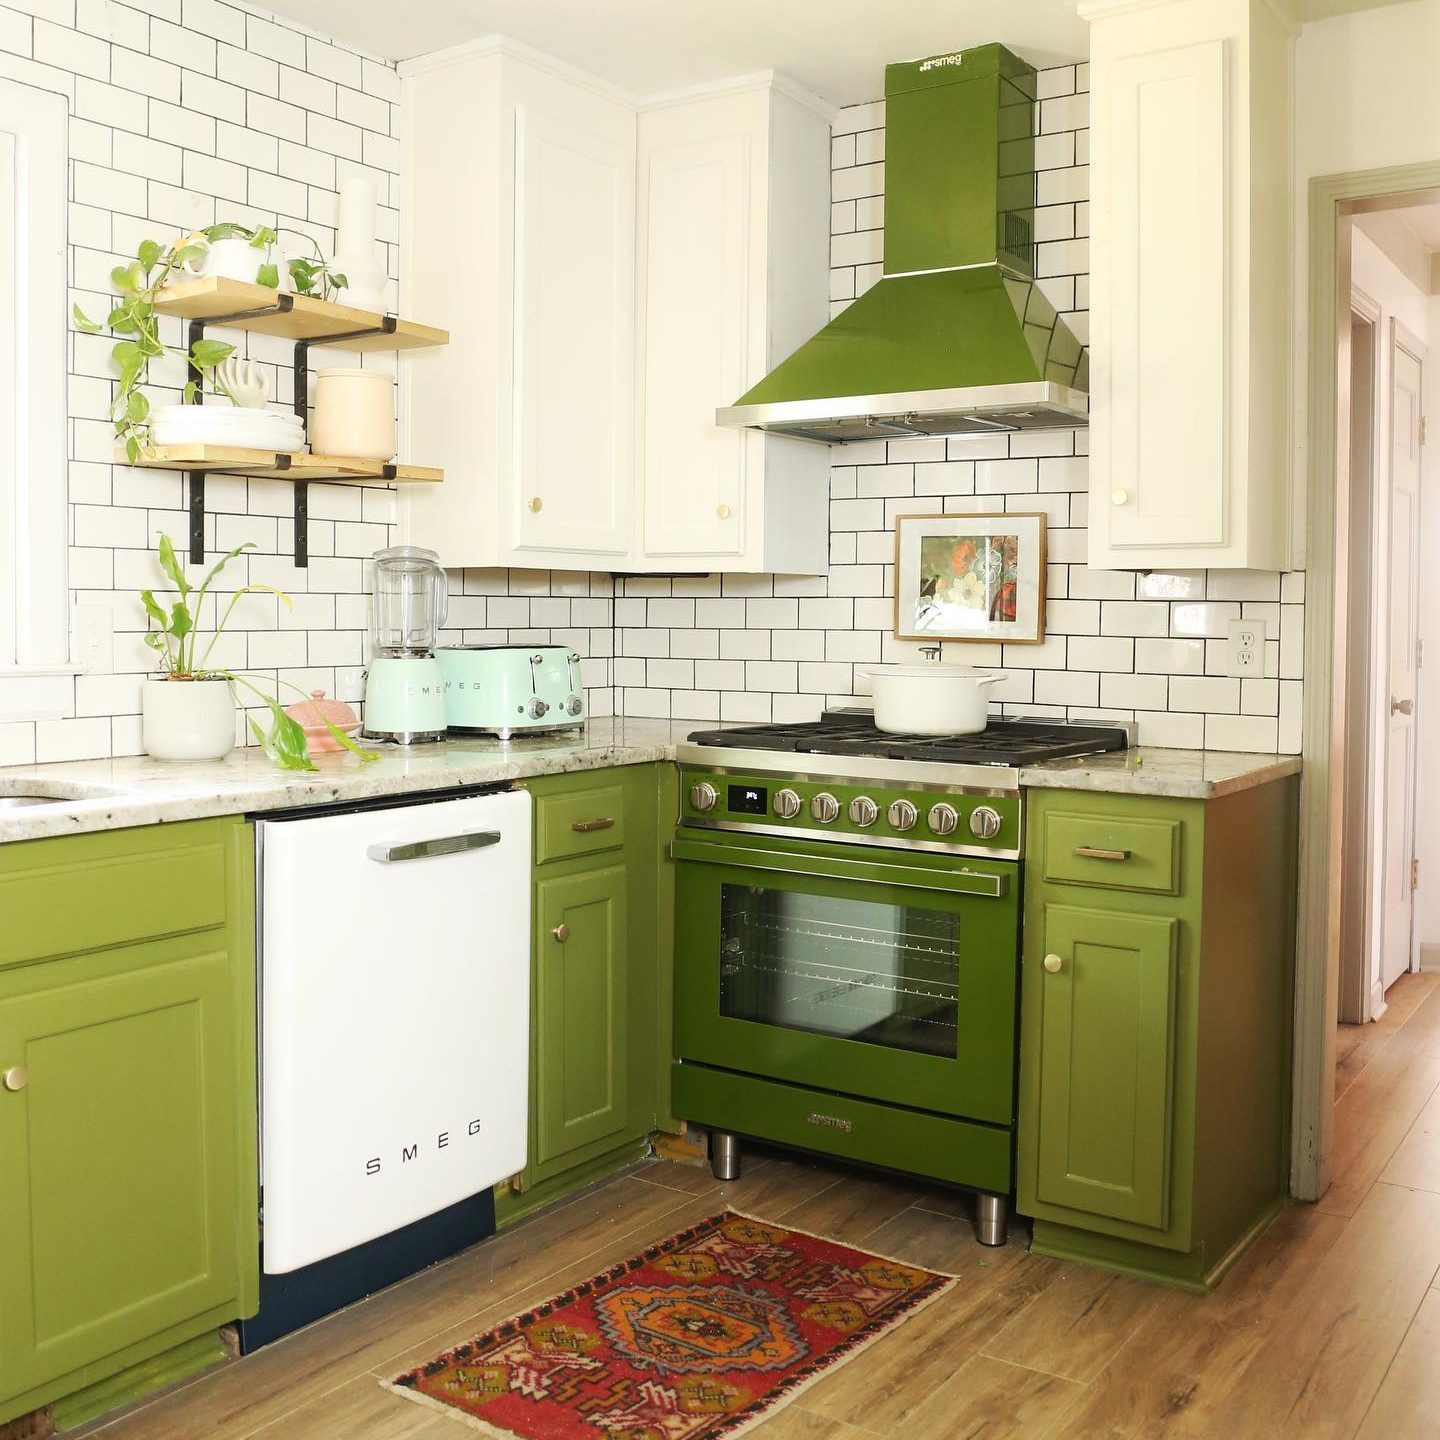 8 Kitchen Cabinet Refacing Before and After Projects